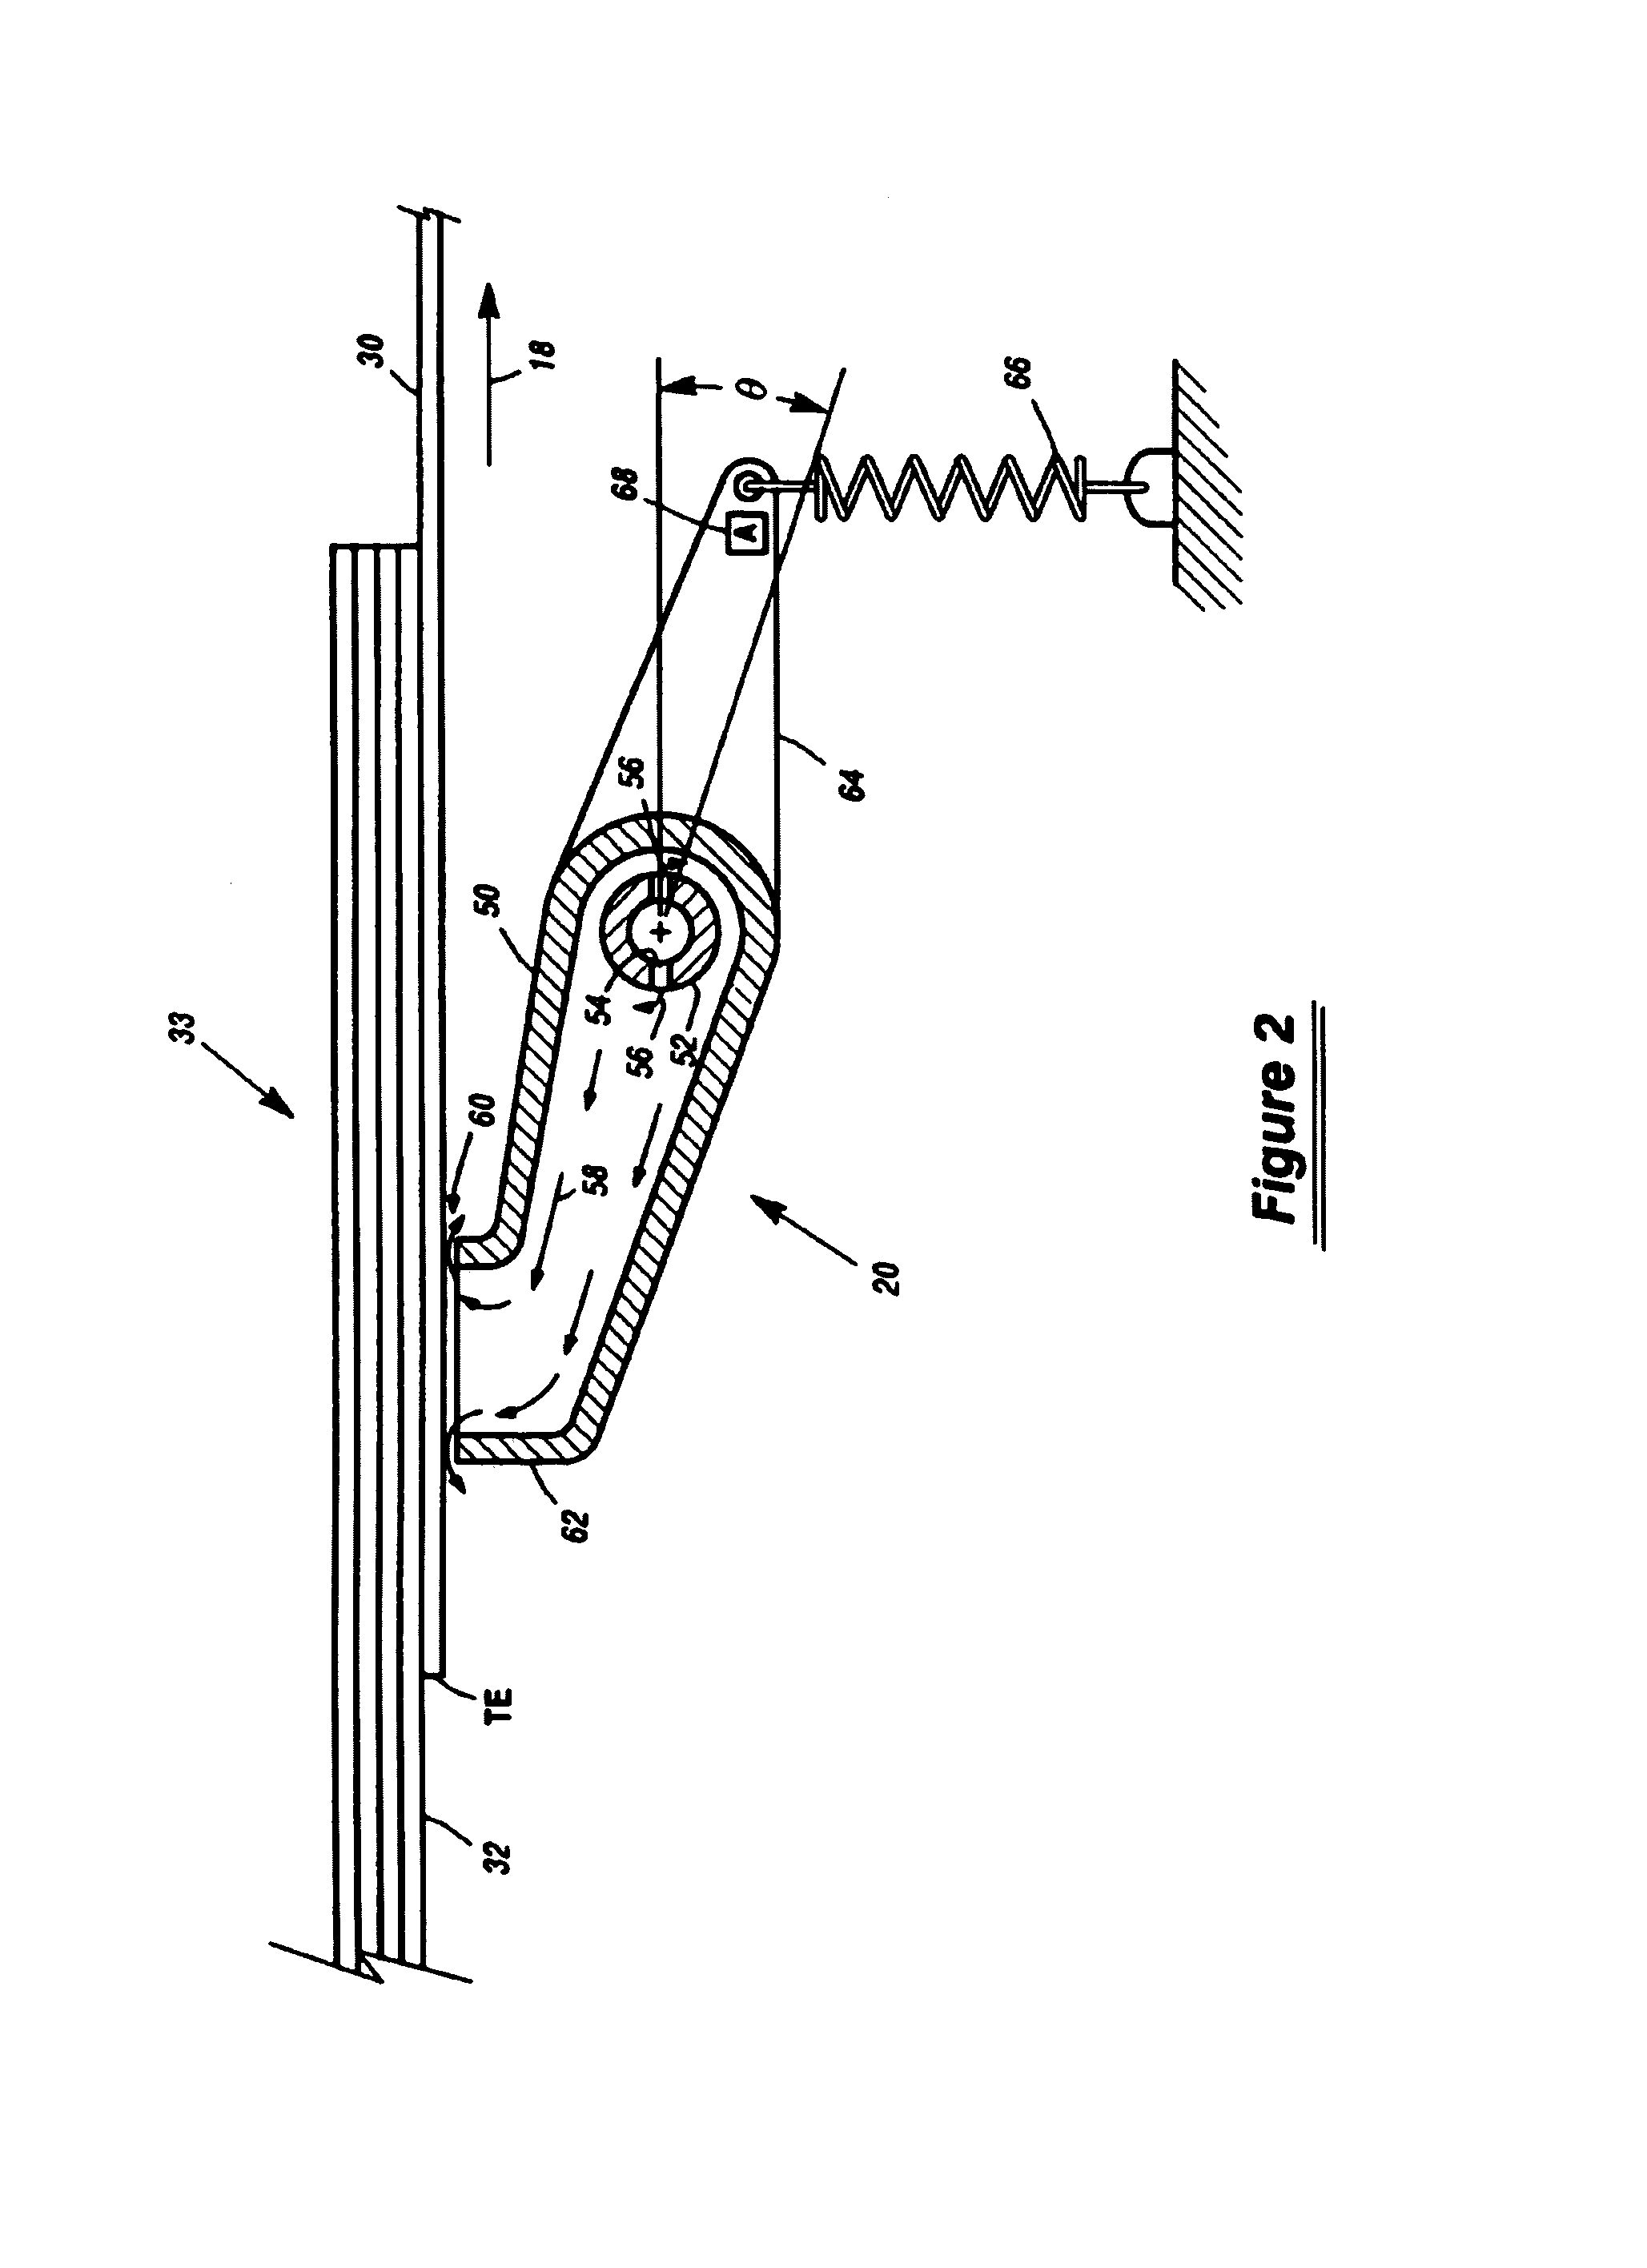 System and method for feeding and transporting documents including document trailing edge detection by sensing an air flow disruption while the document is still being fed from the document stack